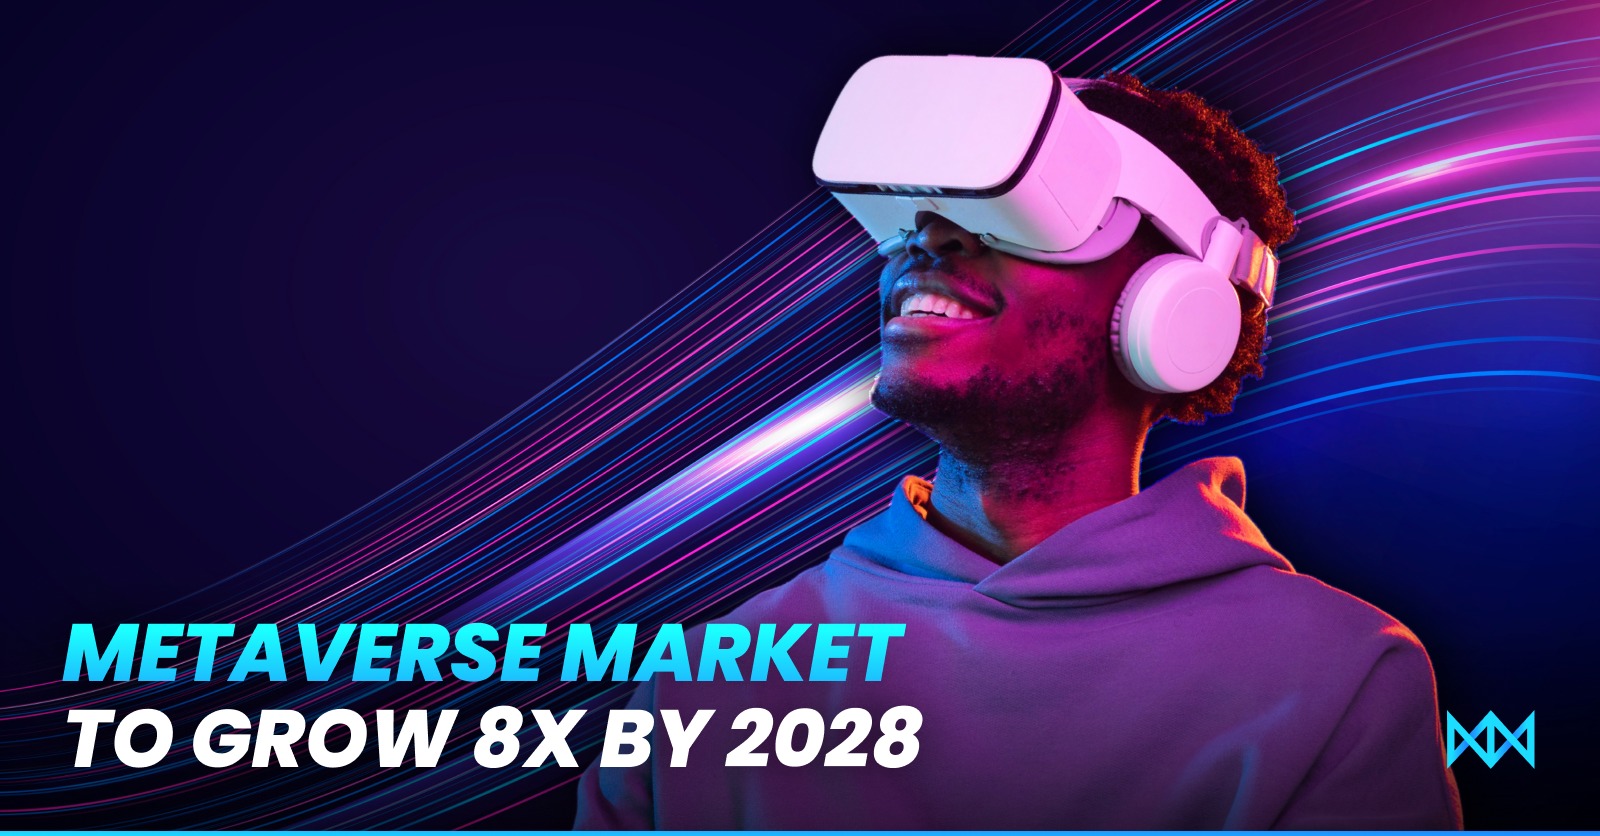 Metaverse Market Size is Predicted to Grow 8x by 2029